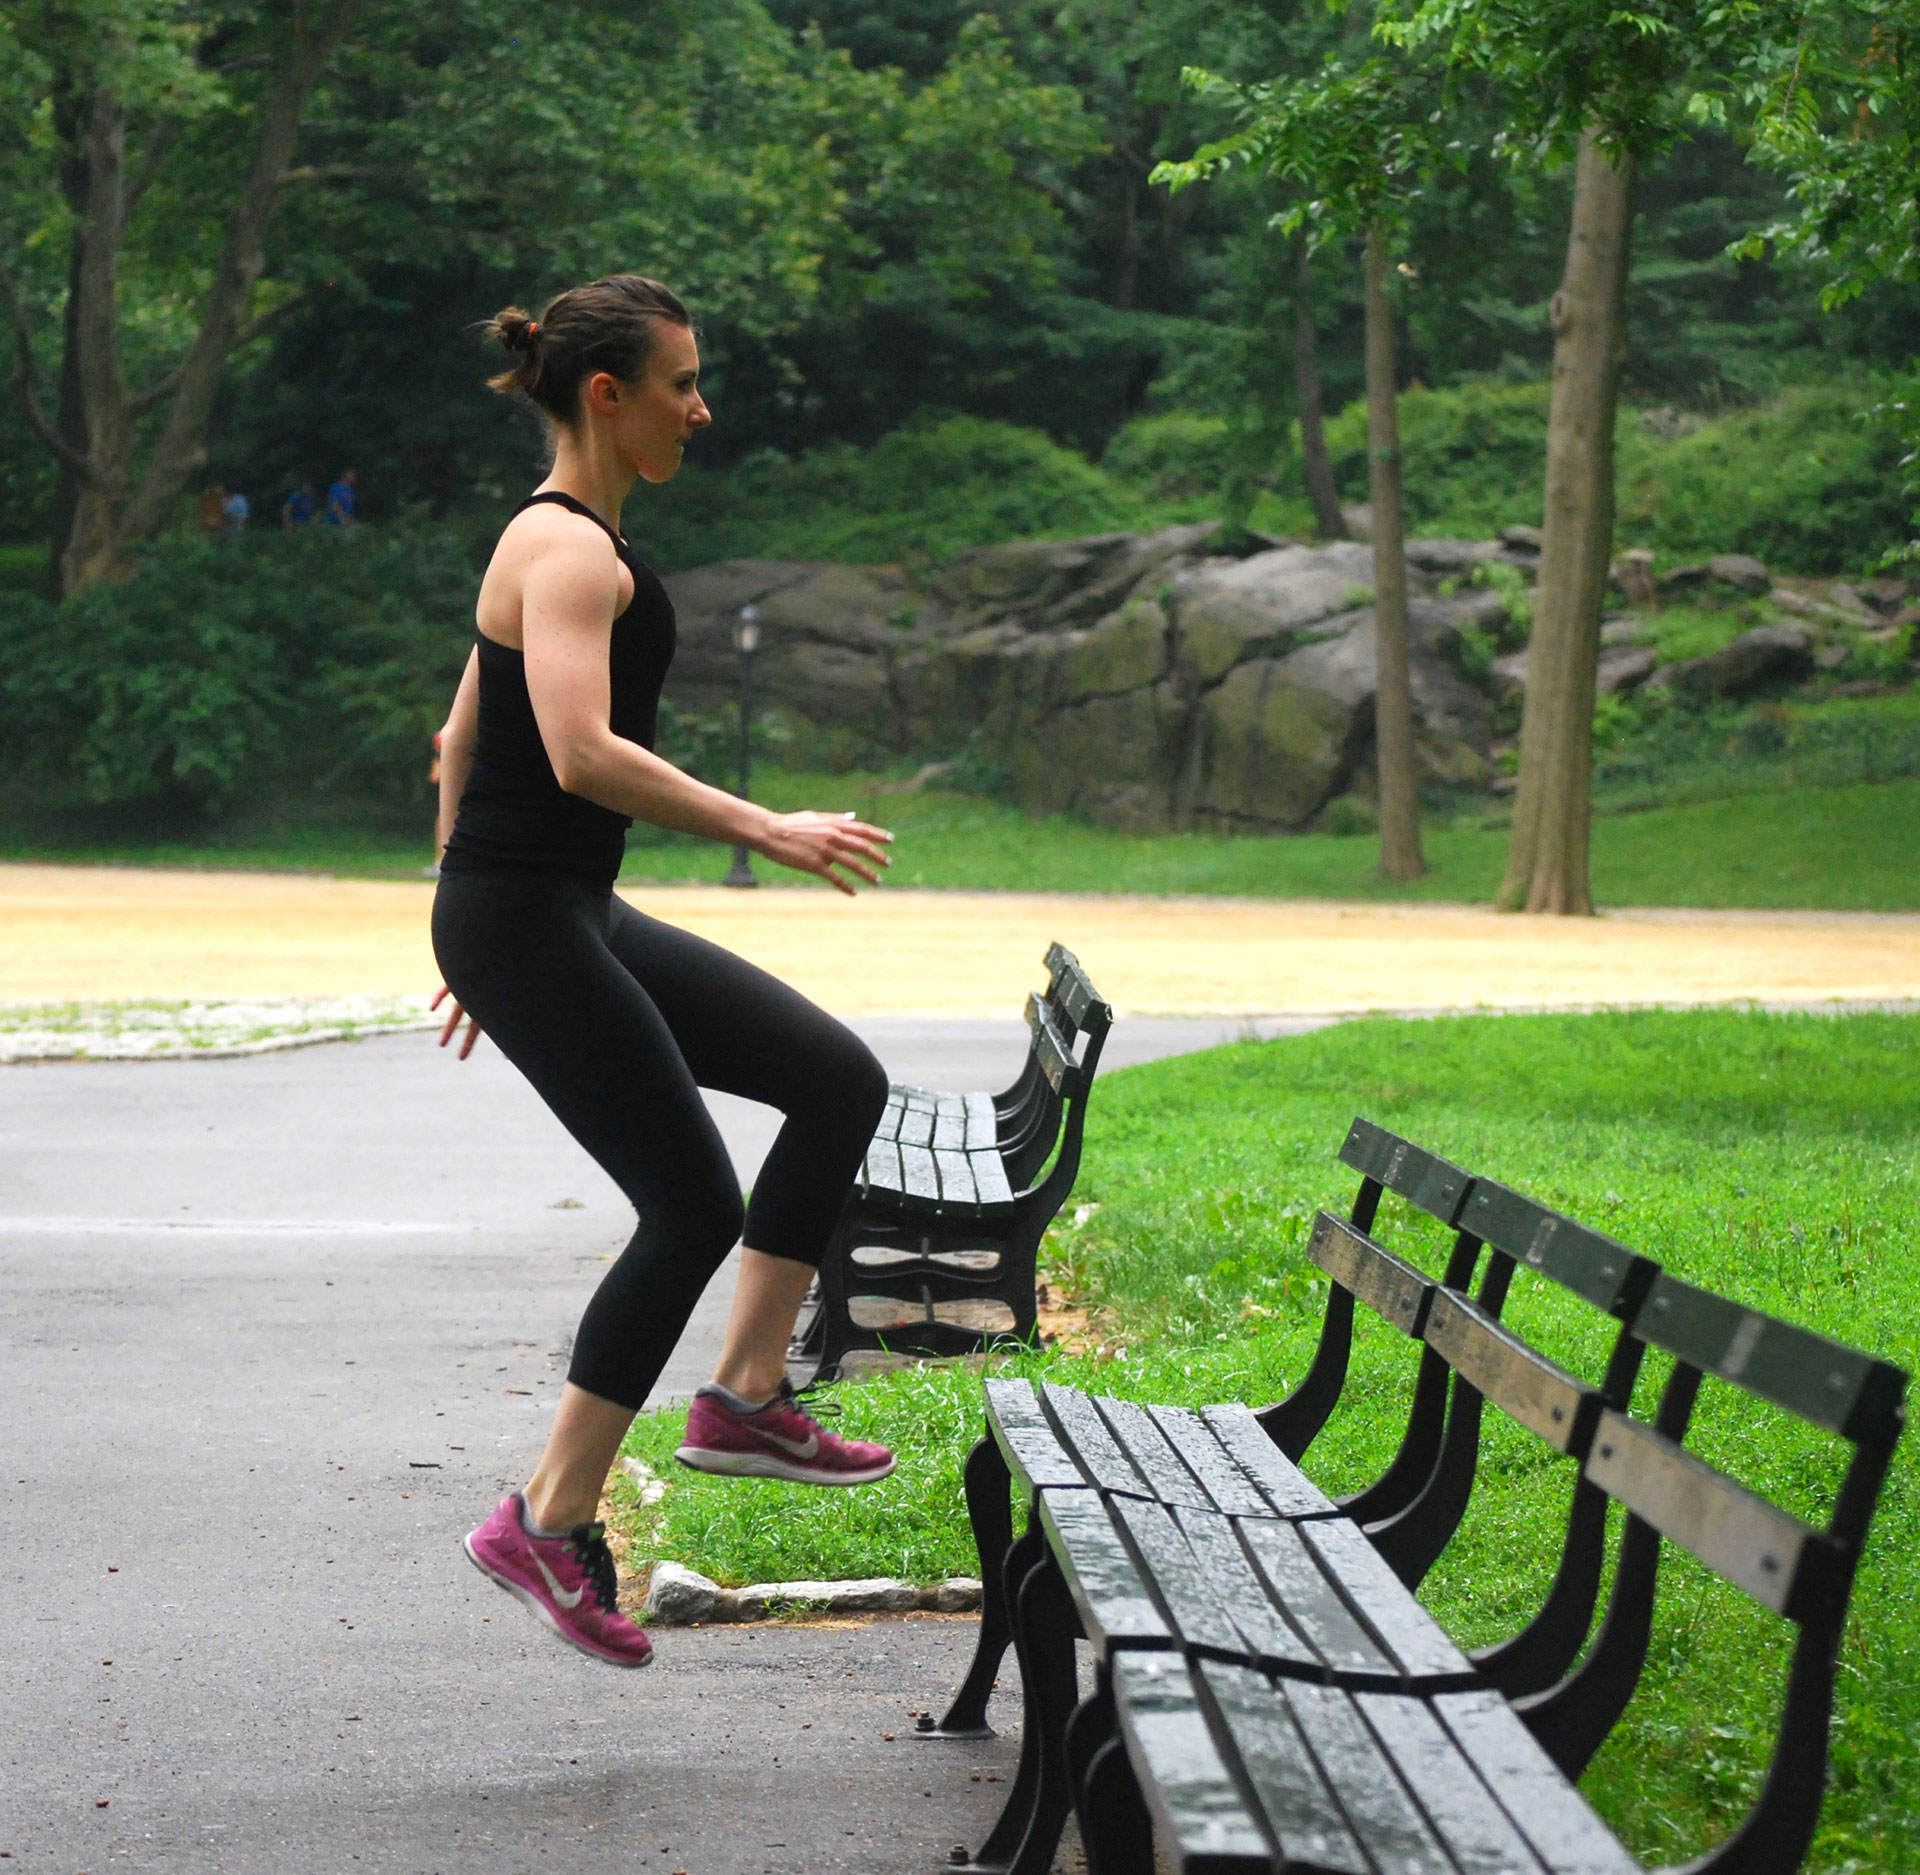 The Outdoor Park Workout You Can Do with Just a Bench